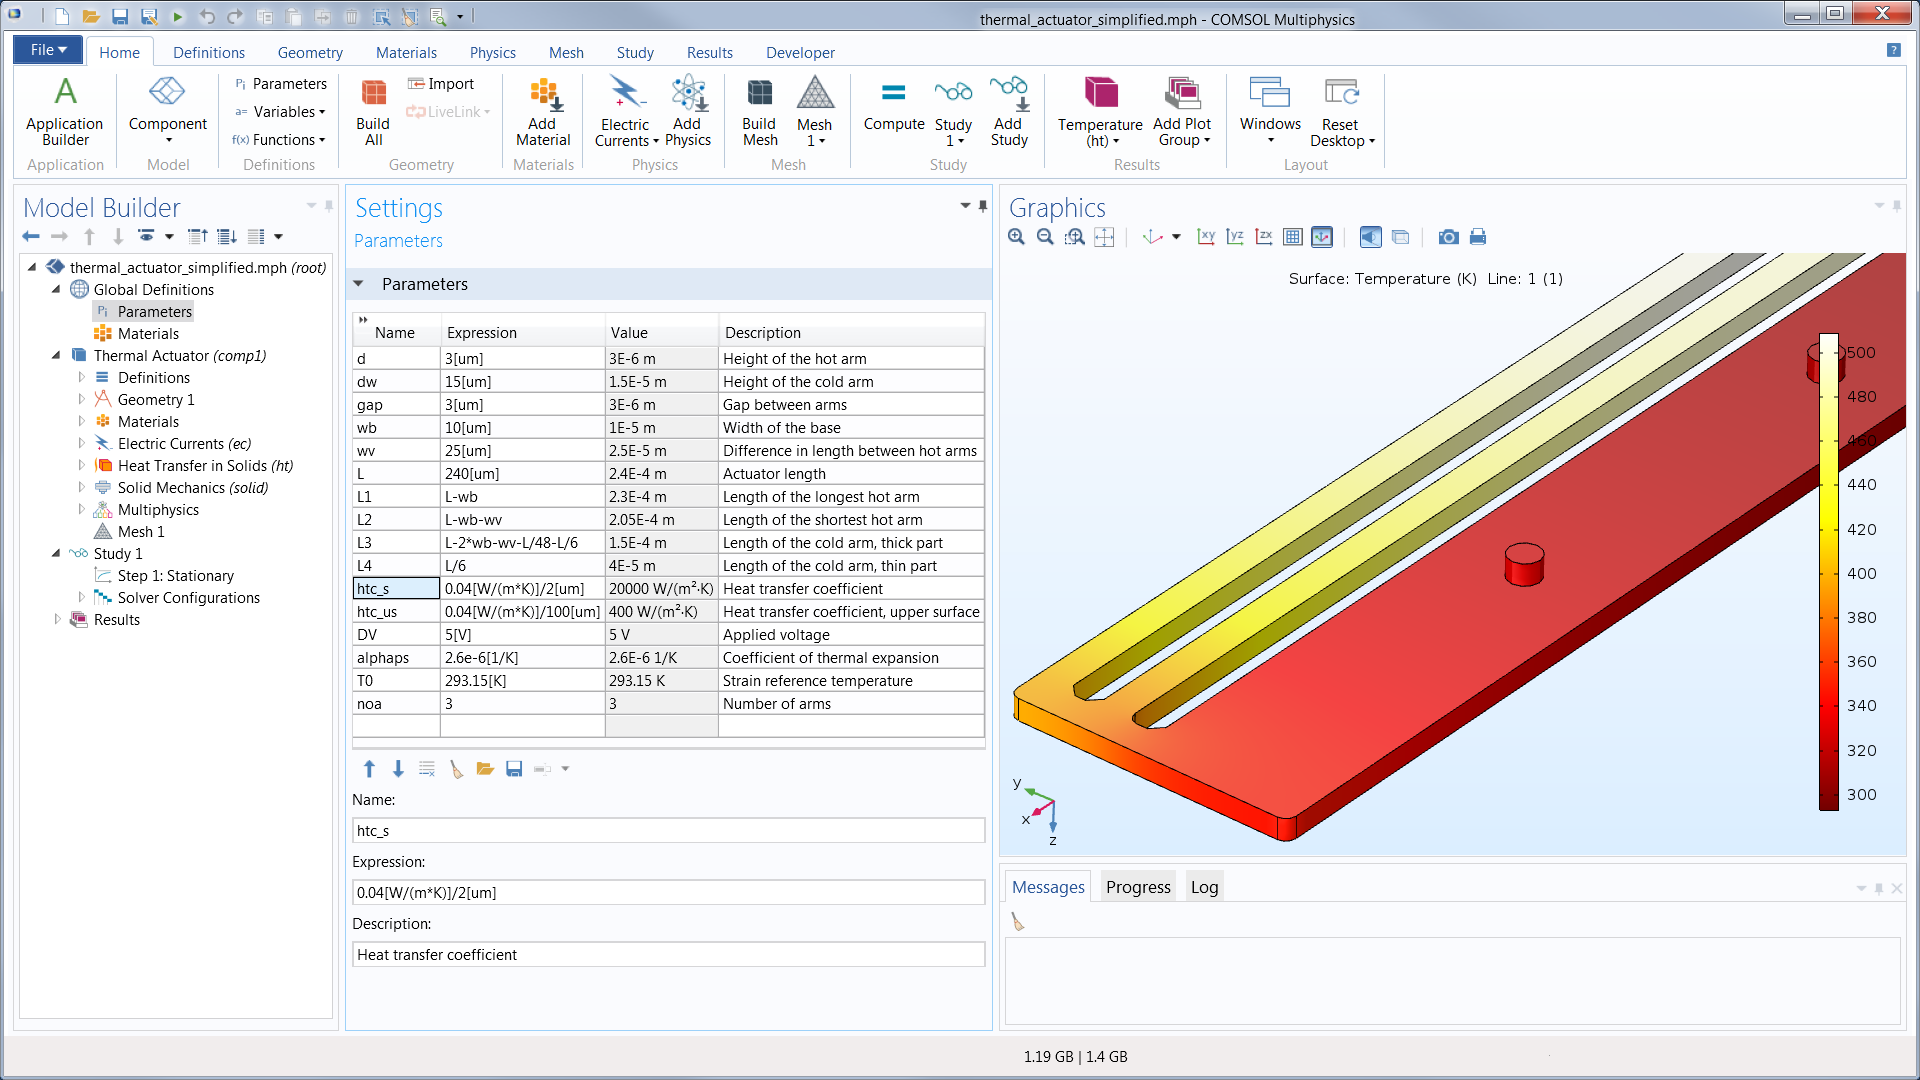 parametric-model-example-comsol-multiphysics-gui.PNG